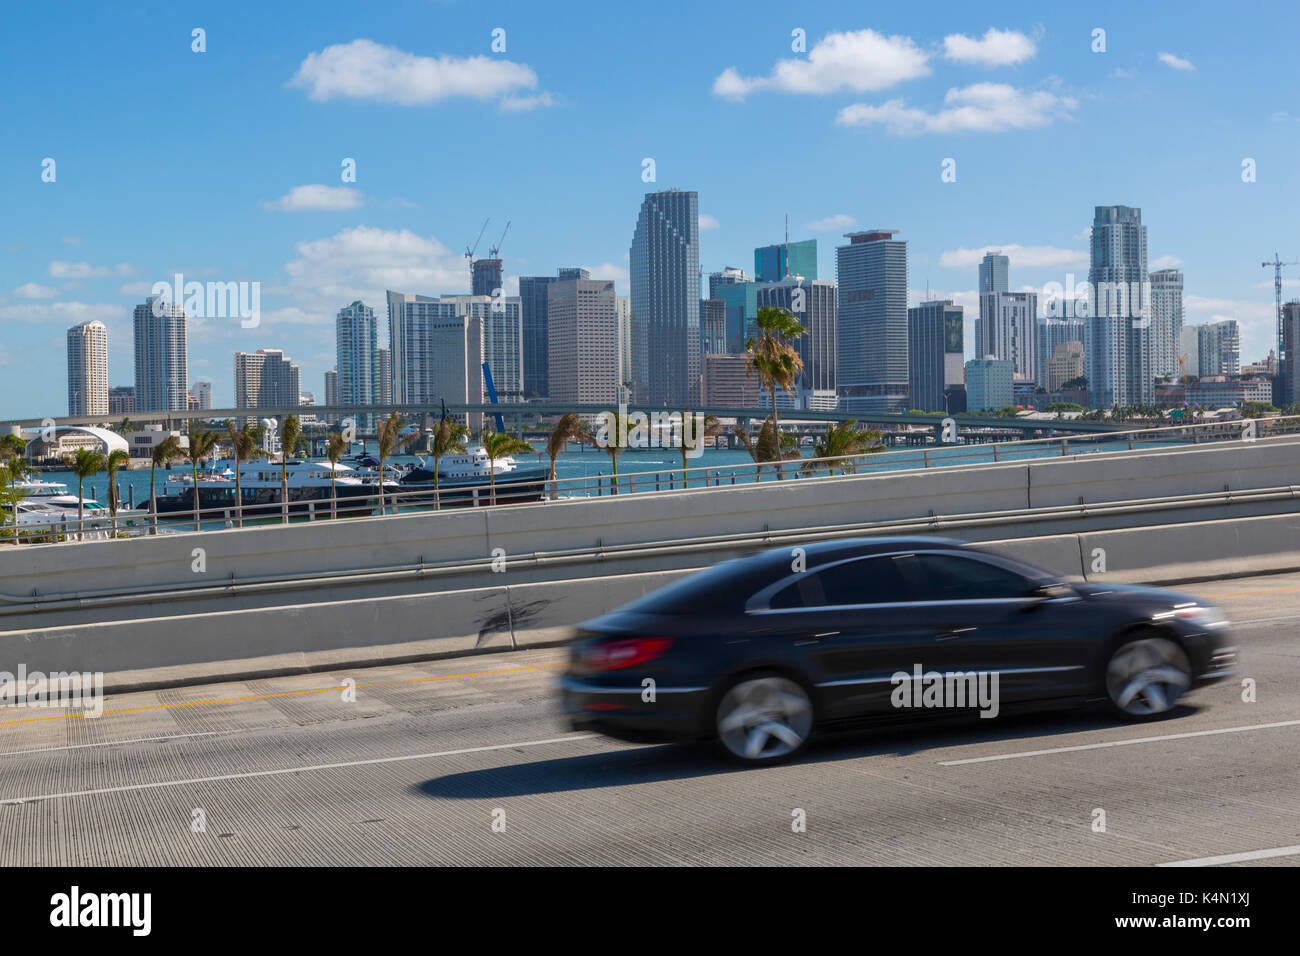 View of Downtown Miami from MacArthur Causeway, Miami, Florida, United States of America, North America Stock Photo